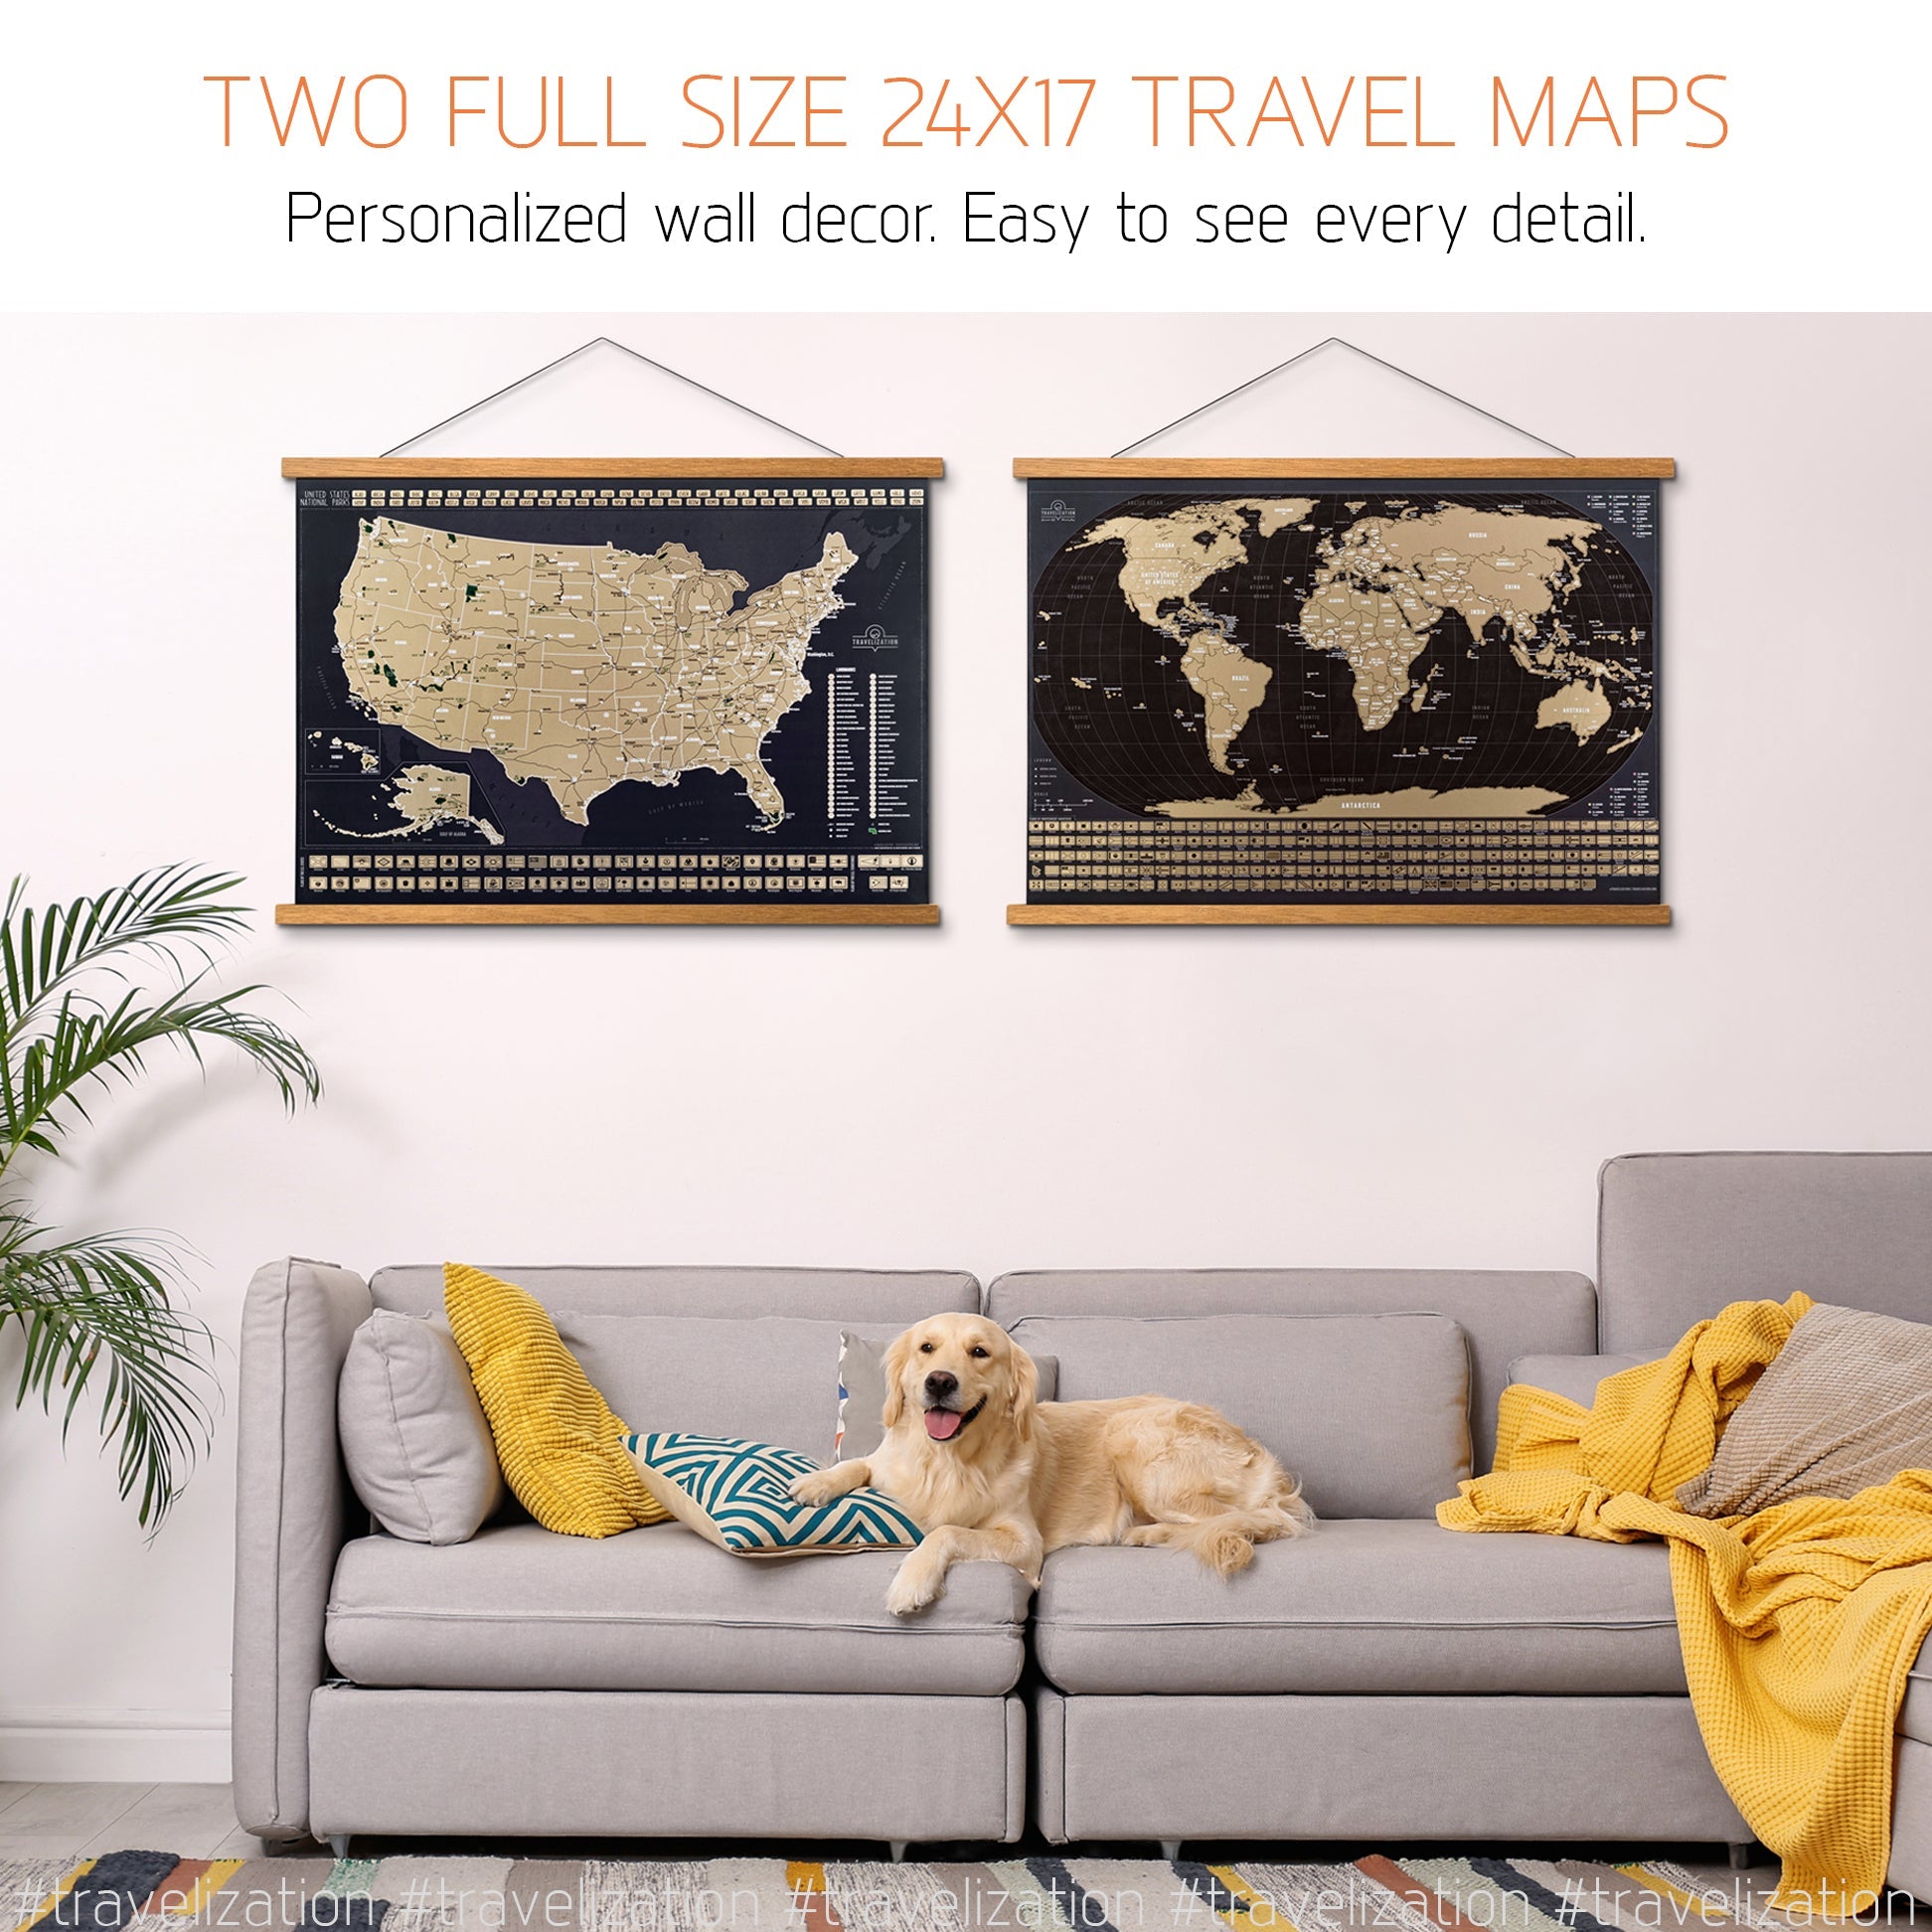  Scratch Off World Map Poster – Deluxe Travel Map